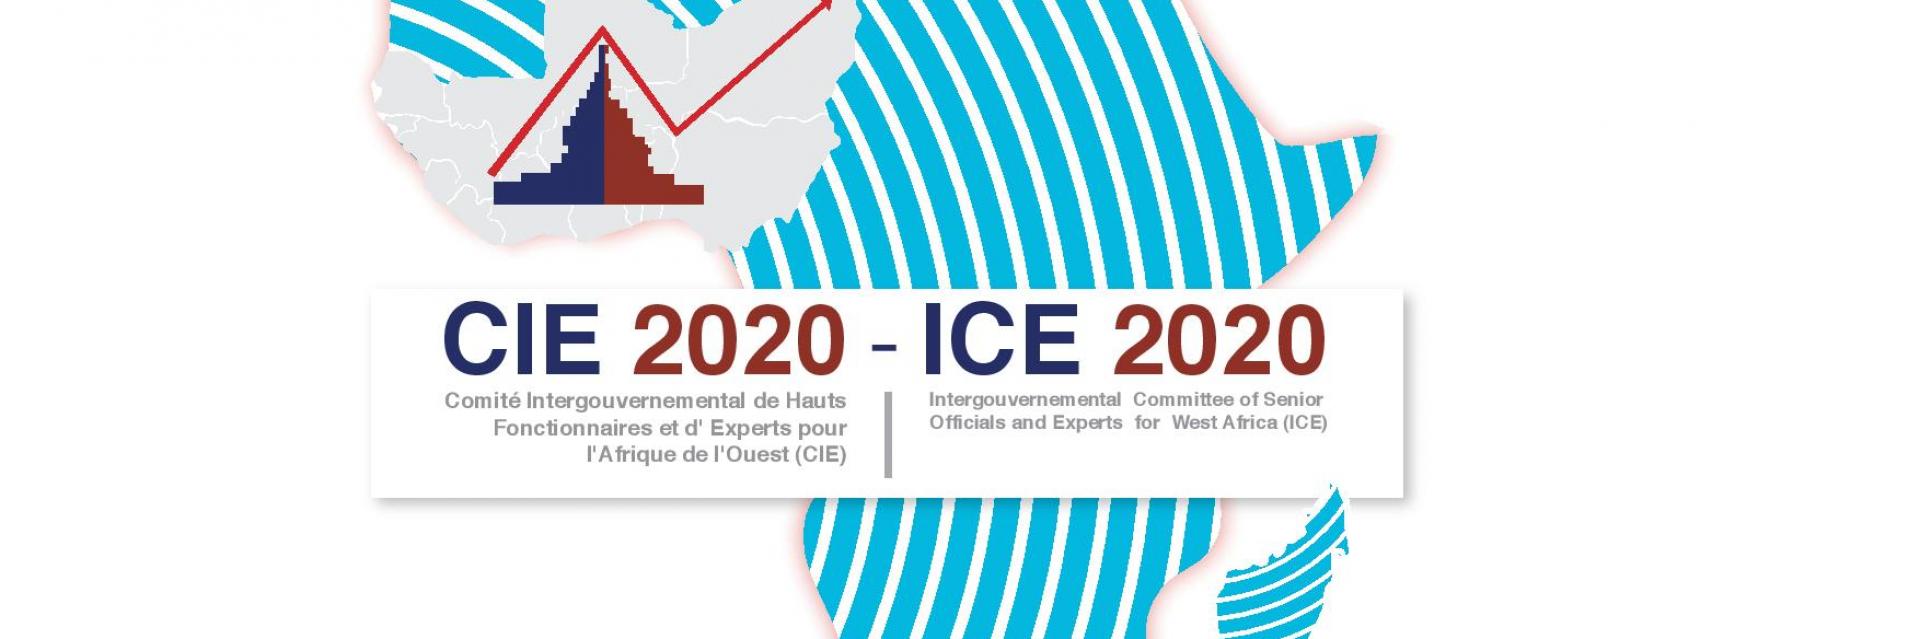 Twenty-Third (23rd) Conference of The Intergovernmental Committee of Senior Officials and Experts (23rd Ice) For West Africa